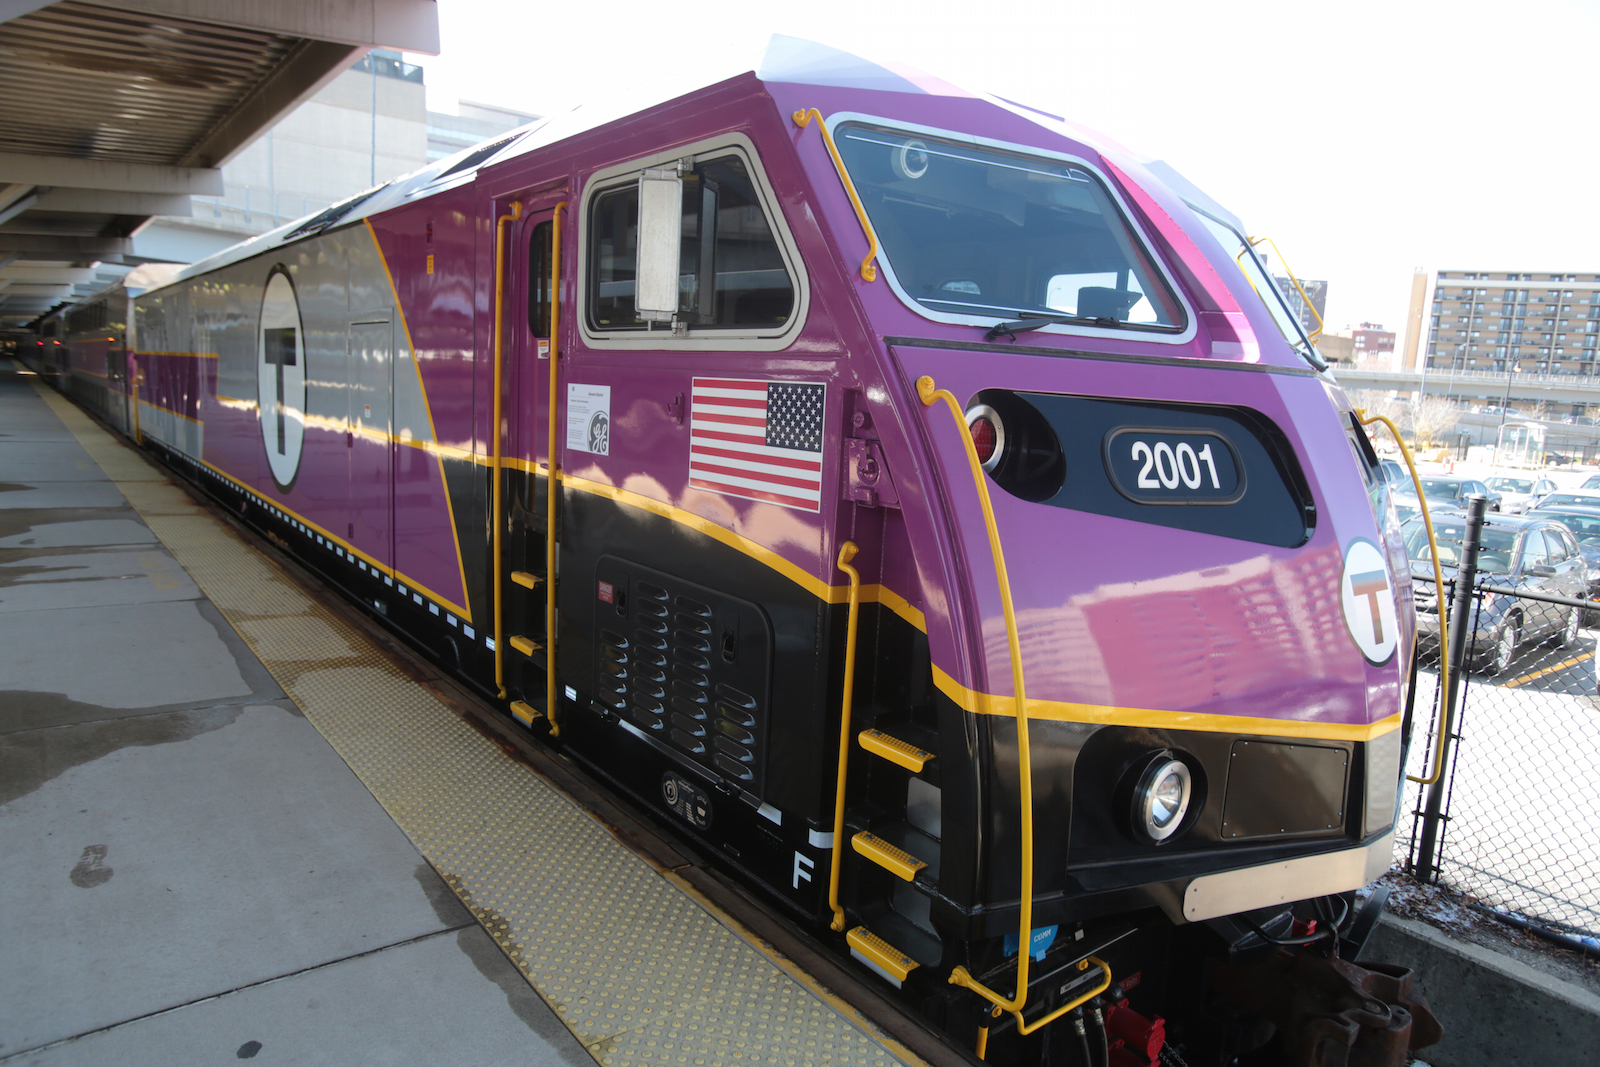 beyonce and jay z concert train } commuter rail to gillette stadium